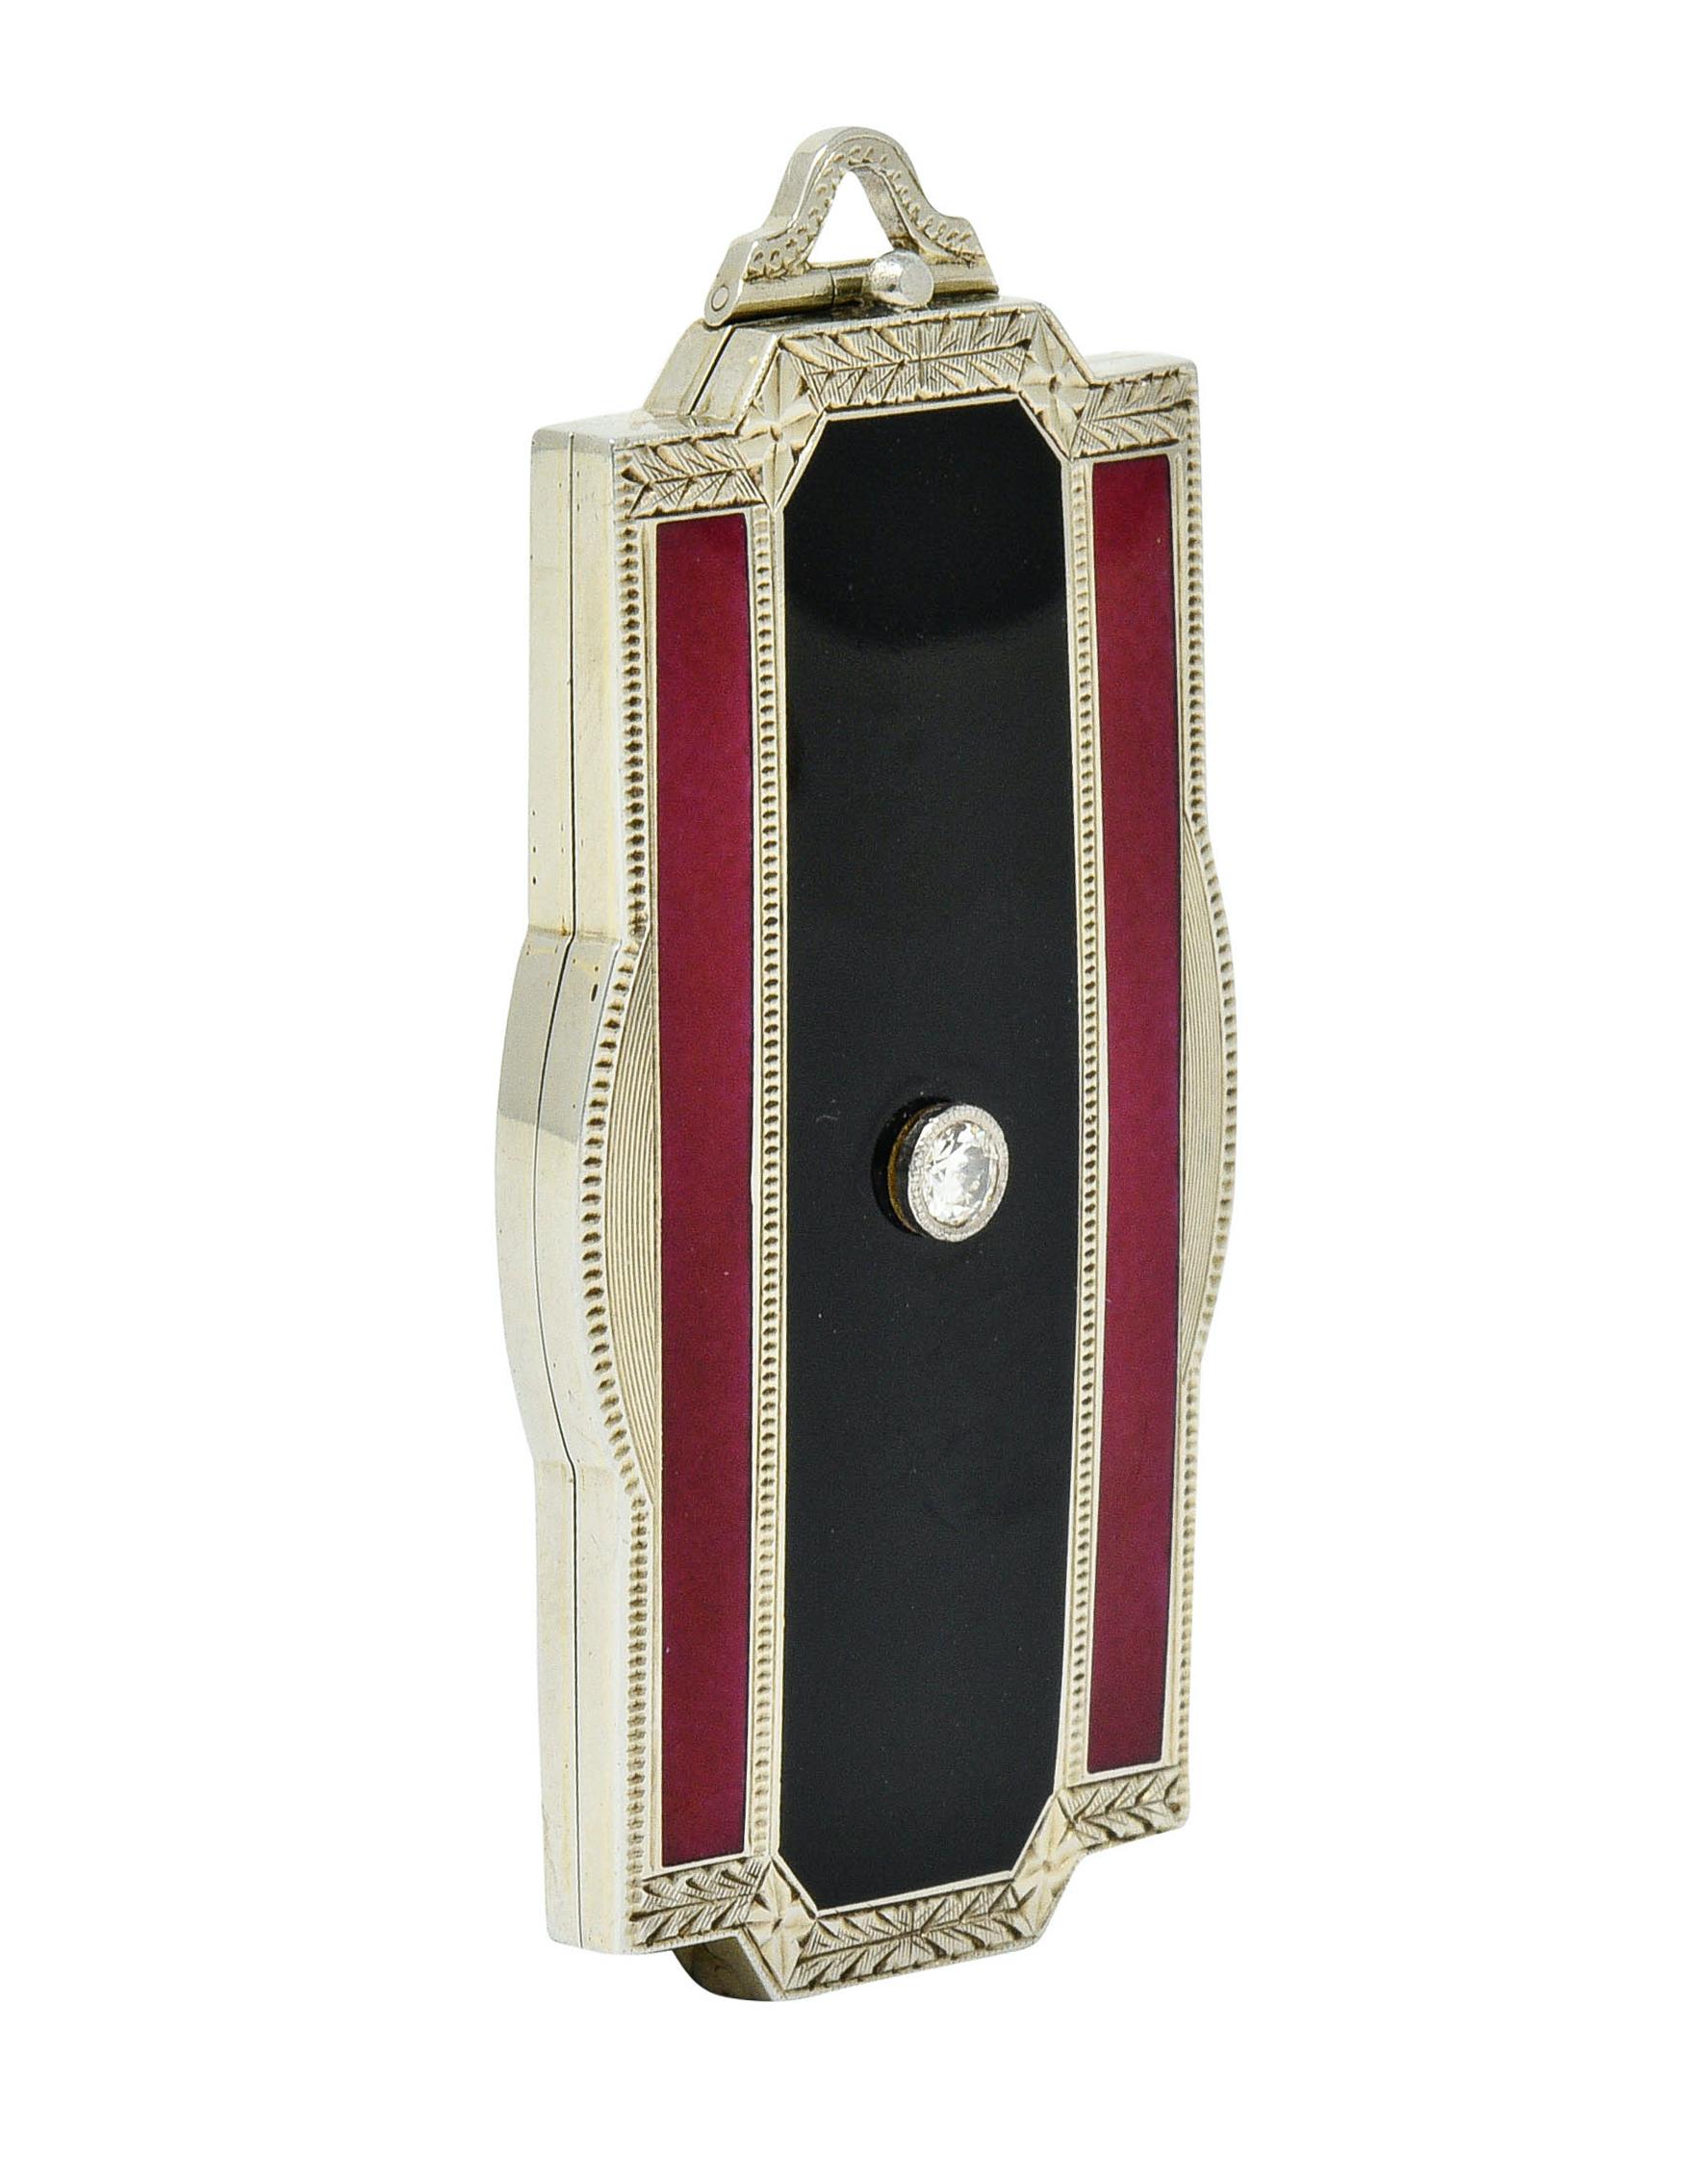 Rectangular locket pendant is glossed by three vertical enamel stripes

Enamel is featured on both front and back, red and black, with no loss and very minor scratches

Front centers a bezel set transitional cut diamond weighing approximately 0.10